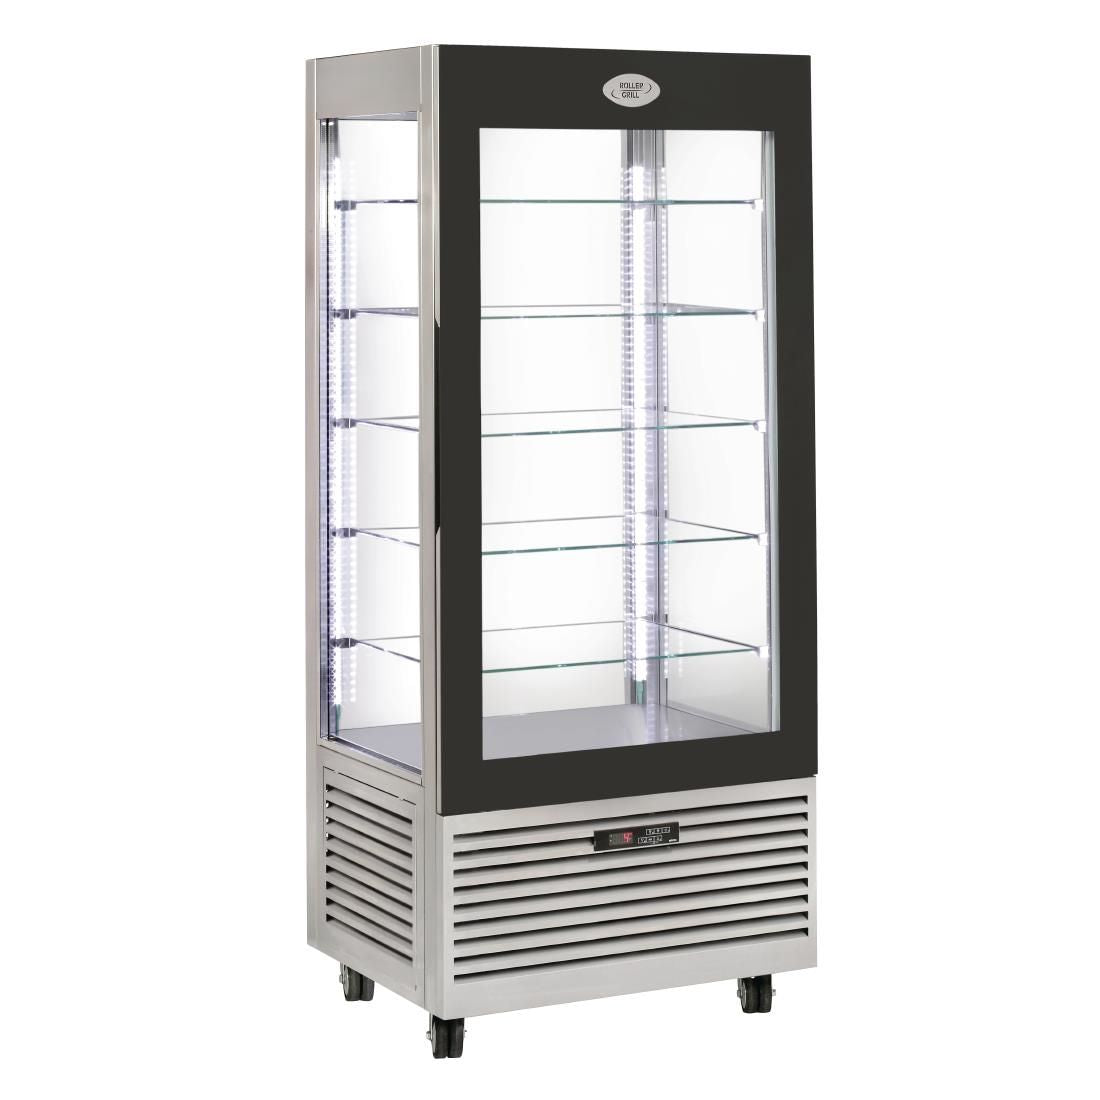 DT736 Roller Grill Display Fridge with Fixed Shelves